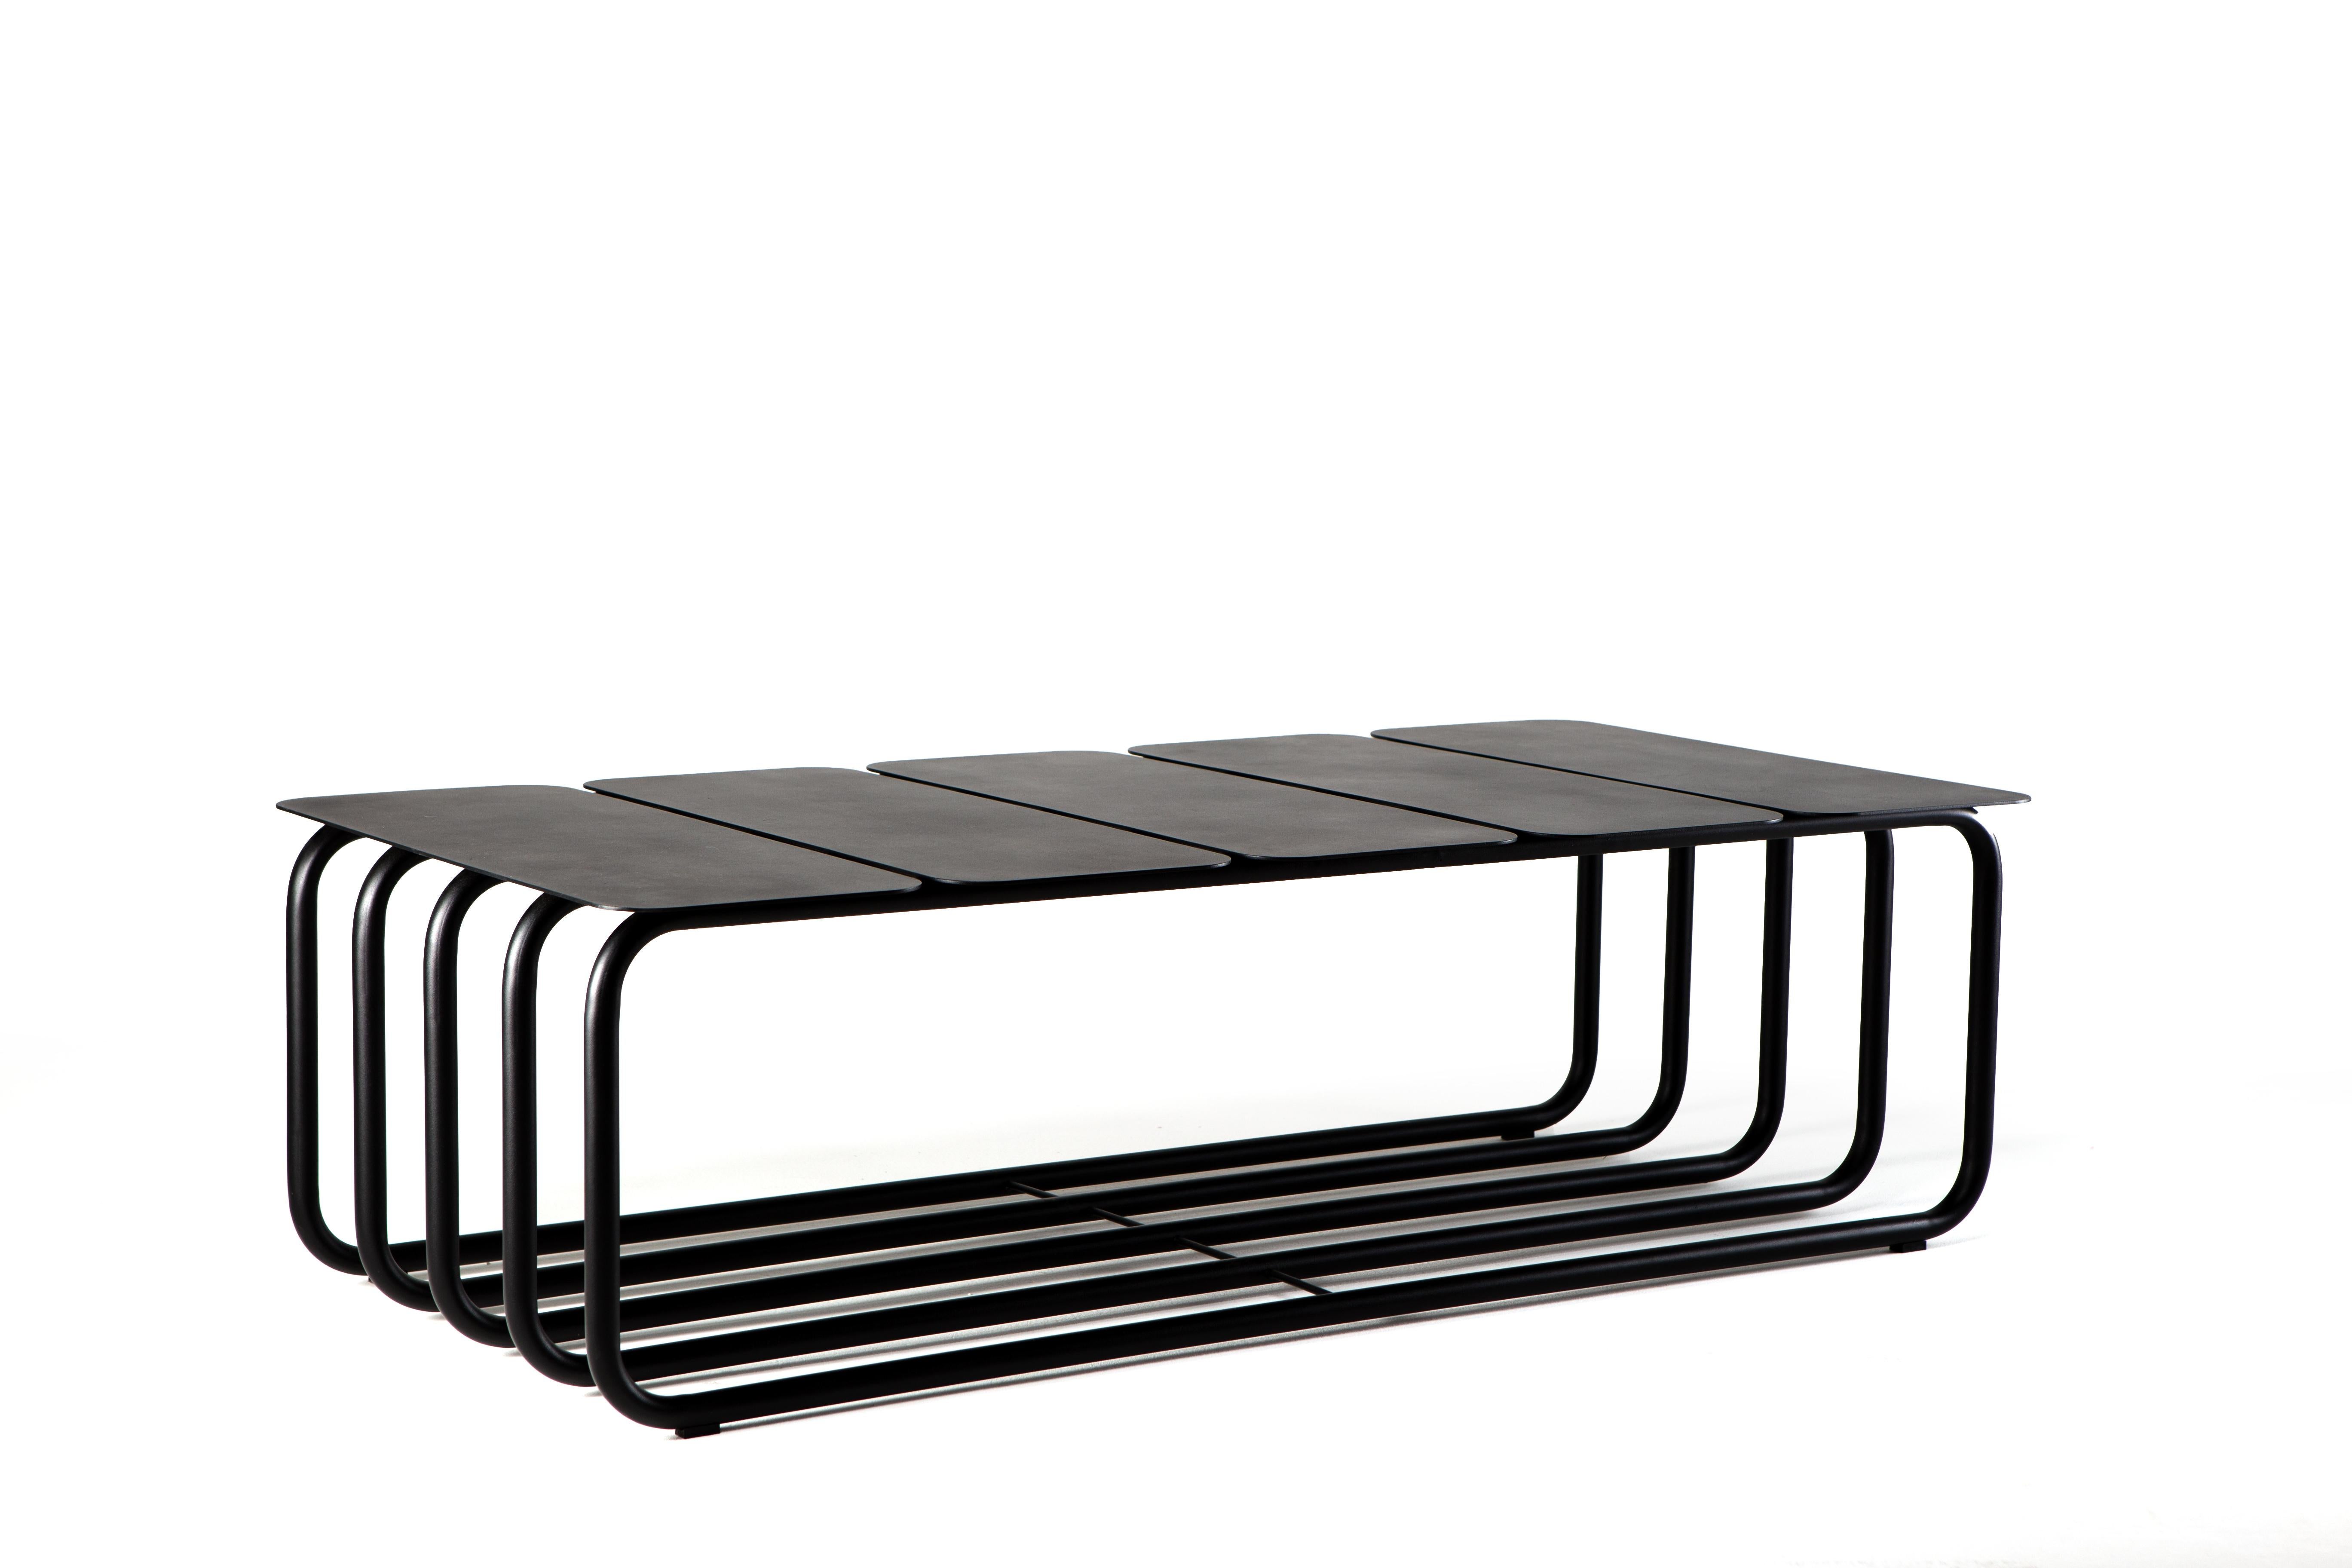 The coffee table is part of the Dureza collection. Carbon steel reigns as raw material, guiding both simple and rigorous forms, and the graphic language of this new series. The solid and geometric character of the metal plates dialogues with the